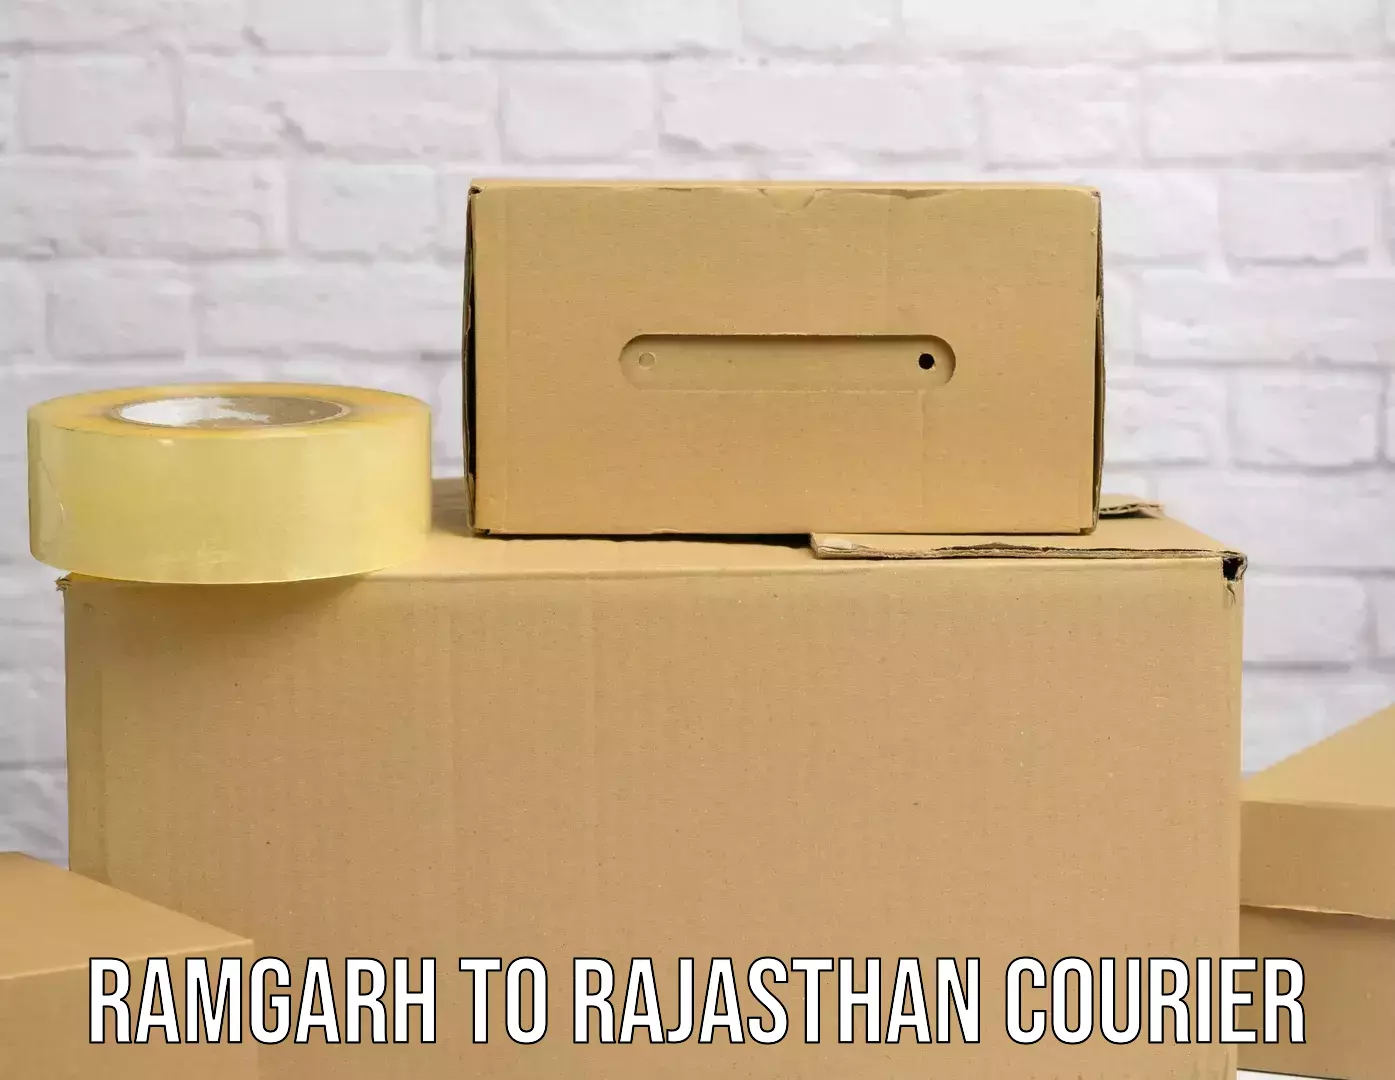 On-call courier service Ramgarh to Sawai Madhopur